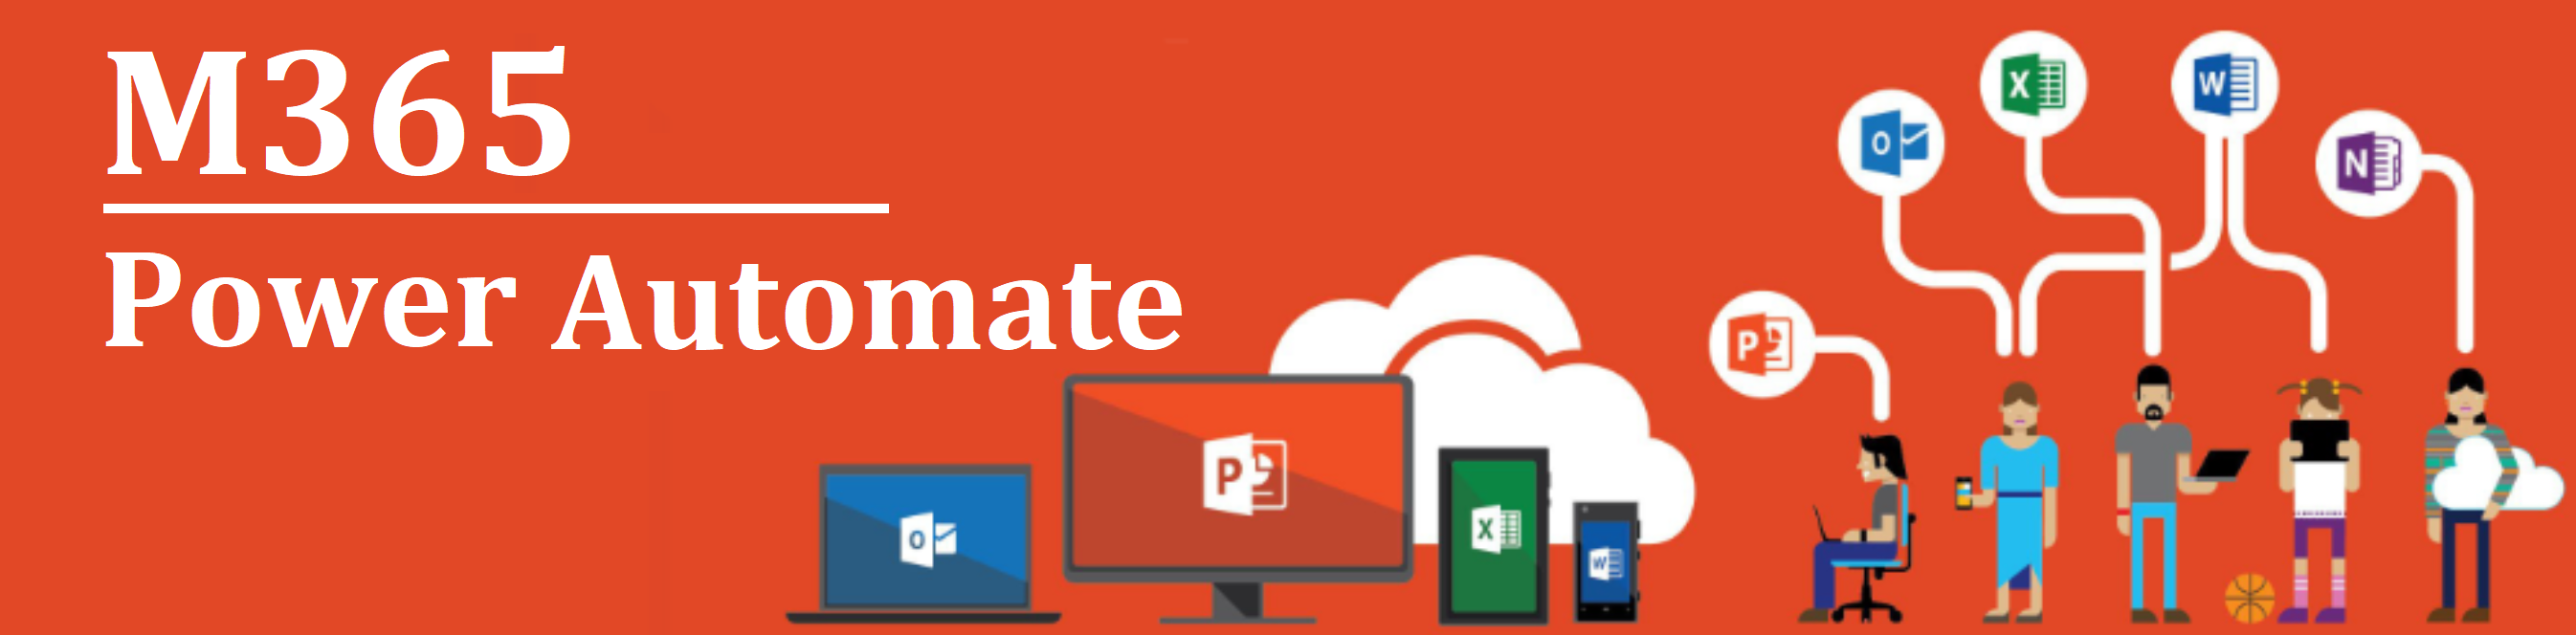 MS365 Banner - PowerAutomate.png